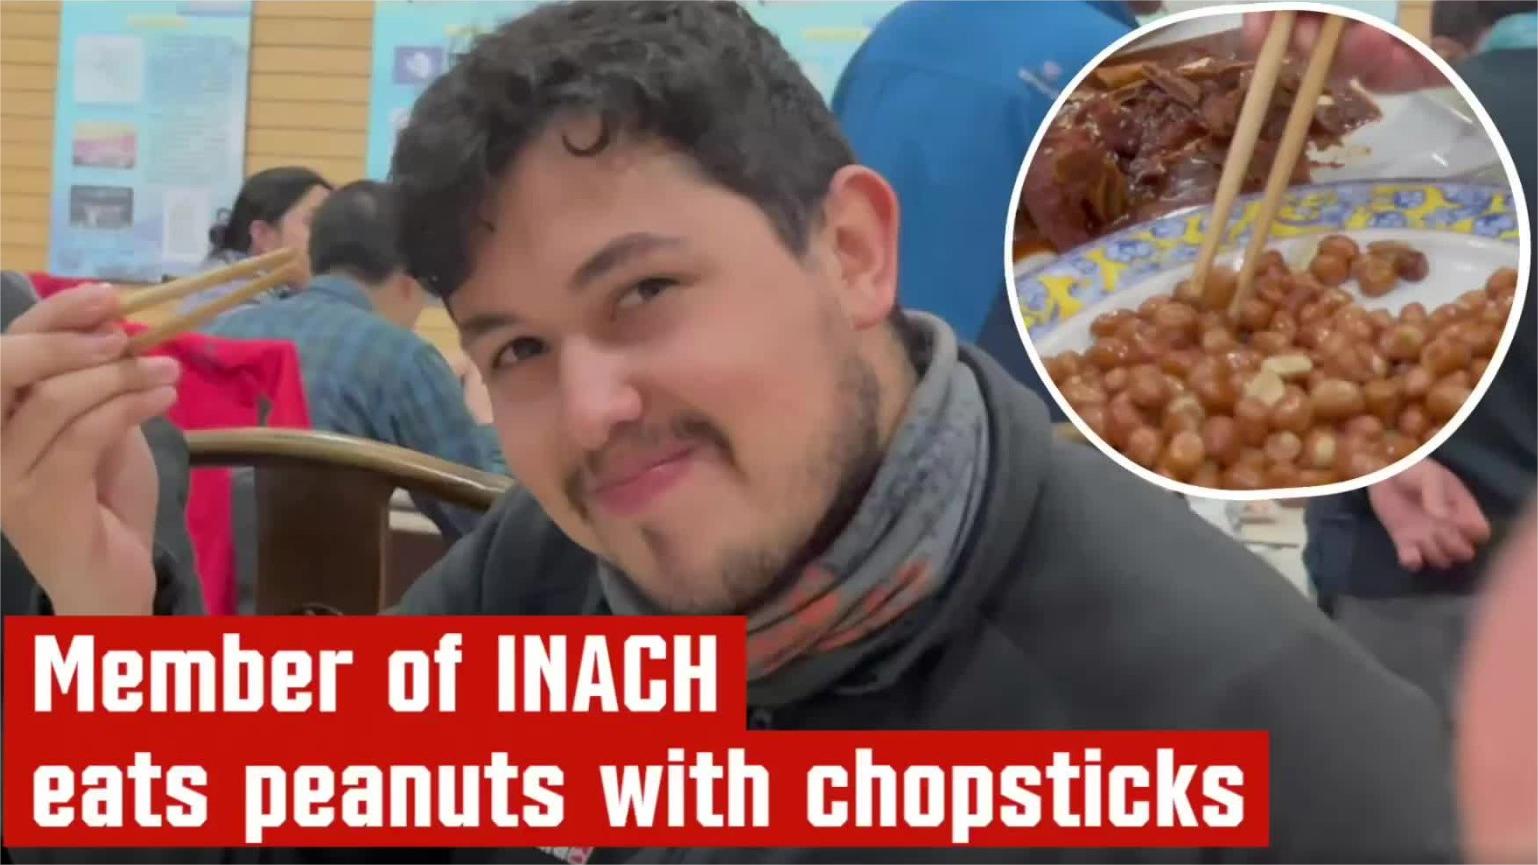 Cultural exchange in Antarctica: Chileans choose chopsticks at China's Great Wall Station